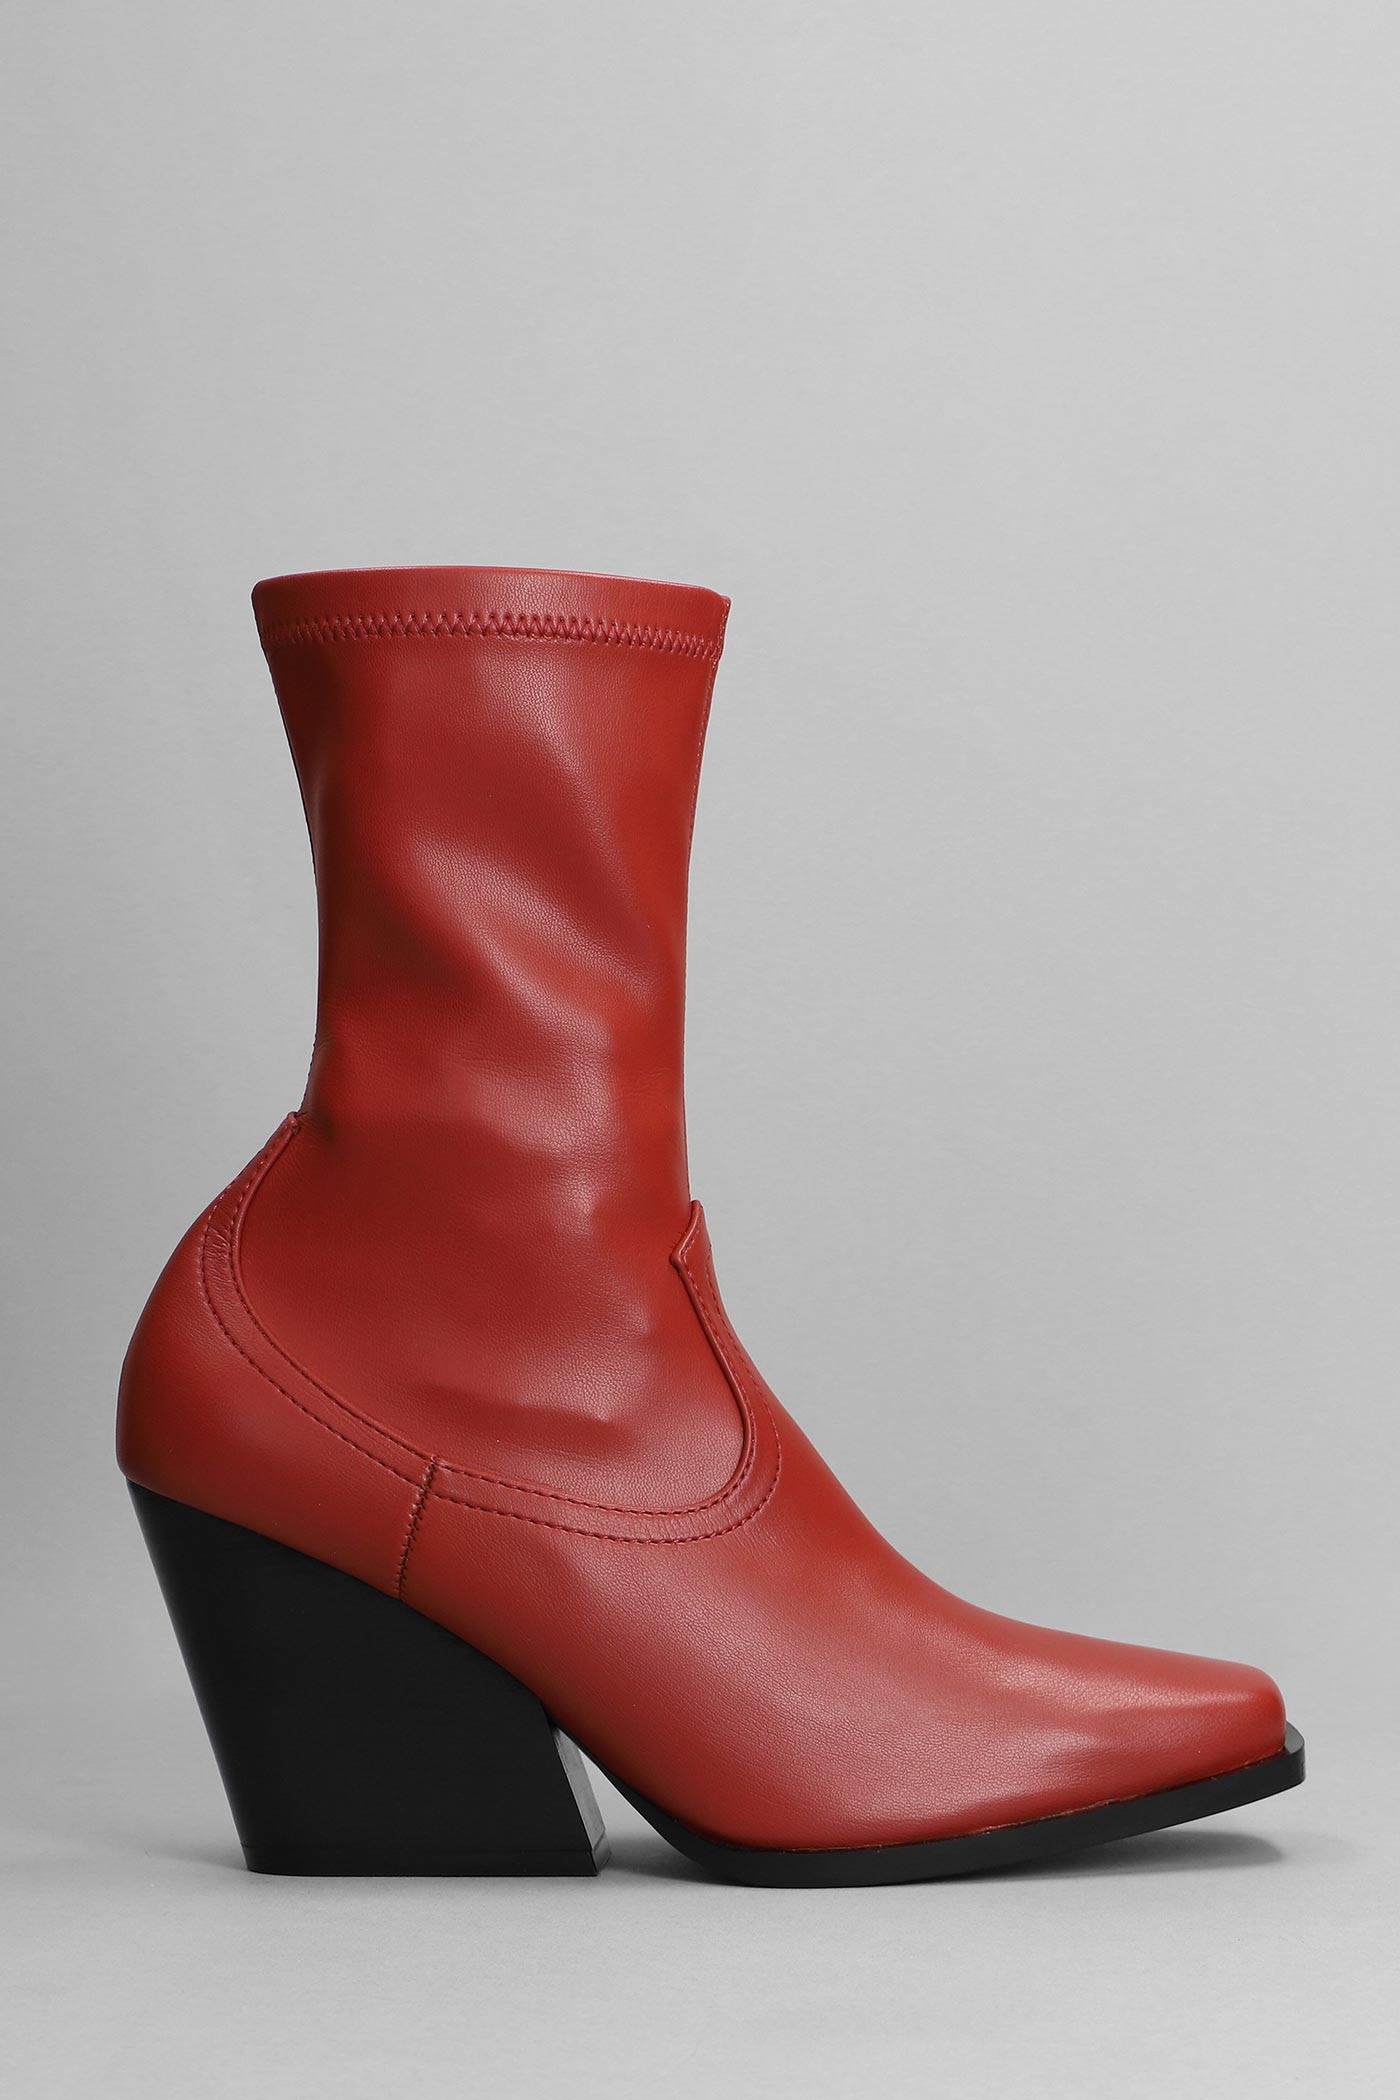 Stella McCartney Cowboy High Heels Ankle Boots In Leather Color Polyester